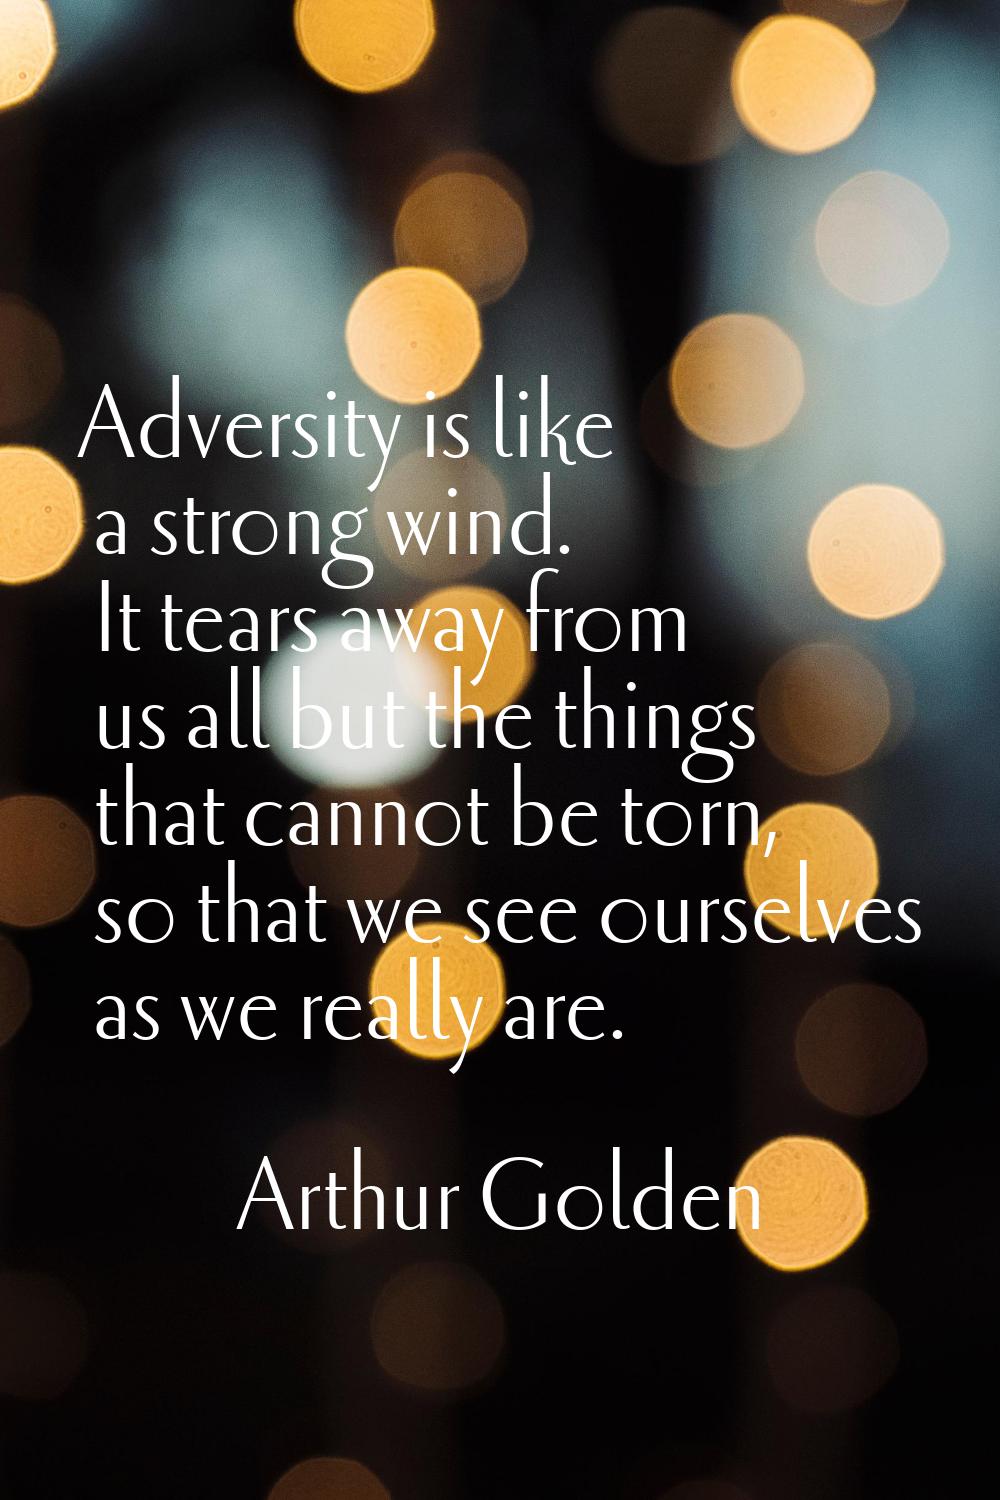 Adversity is like a strong wind. It tears away from us all but the things that cannot be torn, so t